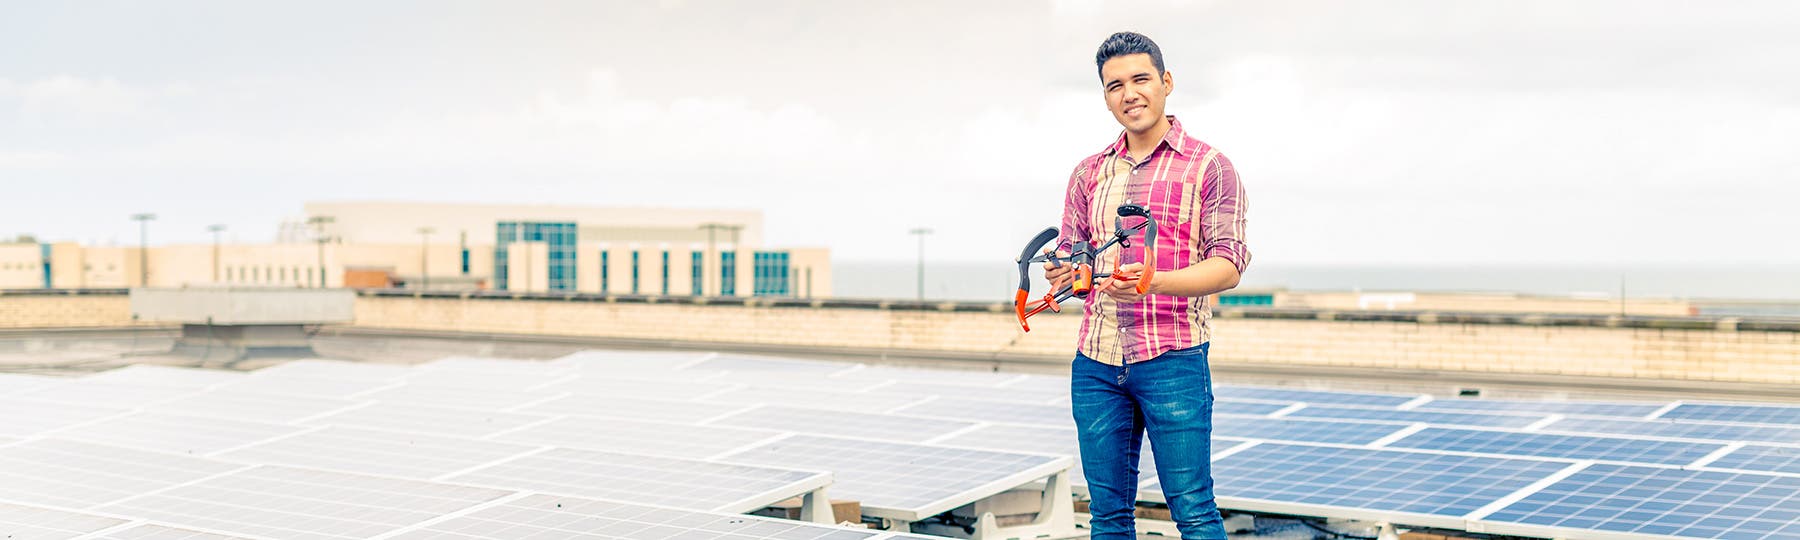 Student standing on rooftop holding drone